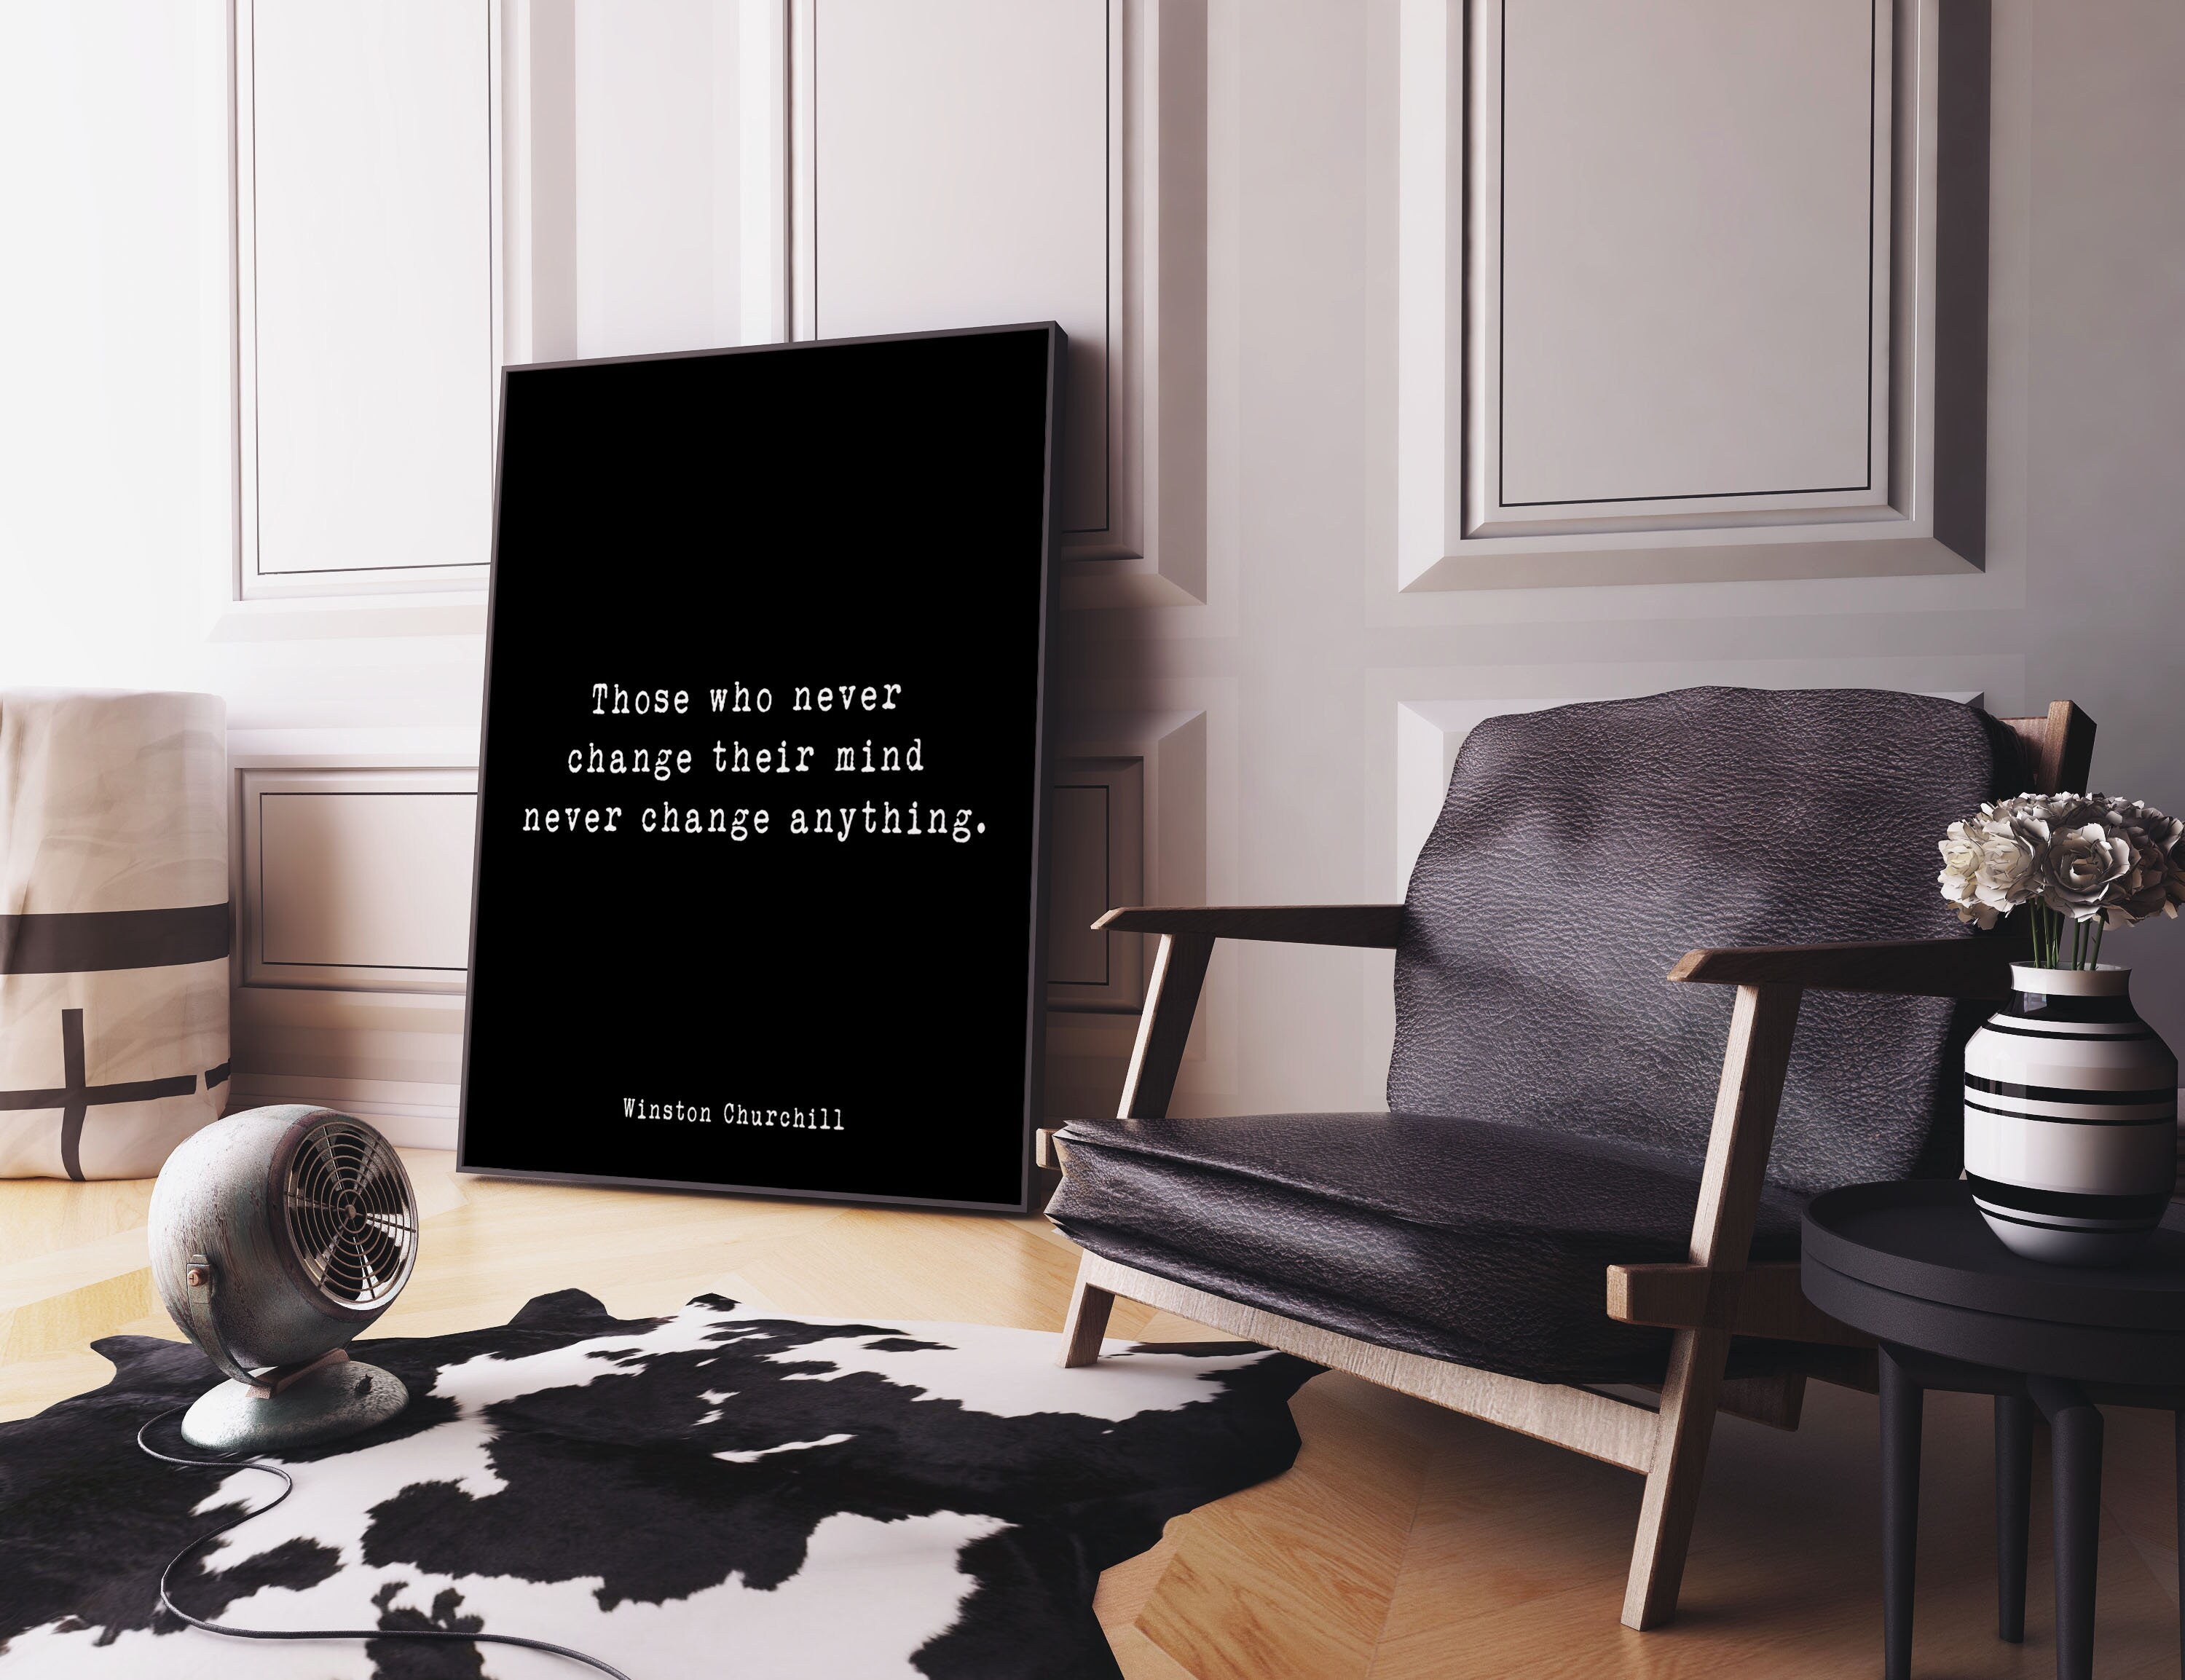 Winston Churchill Quote Print, Those Who Never Change Their Mind Never Change Anything